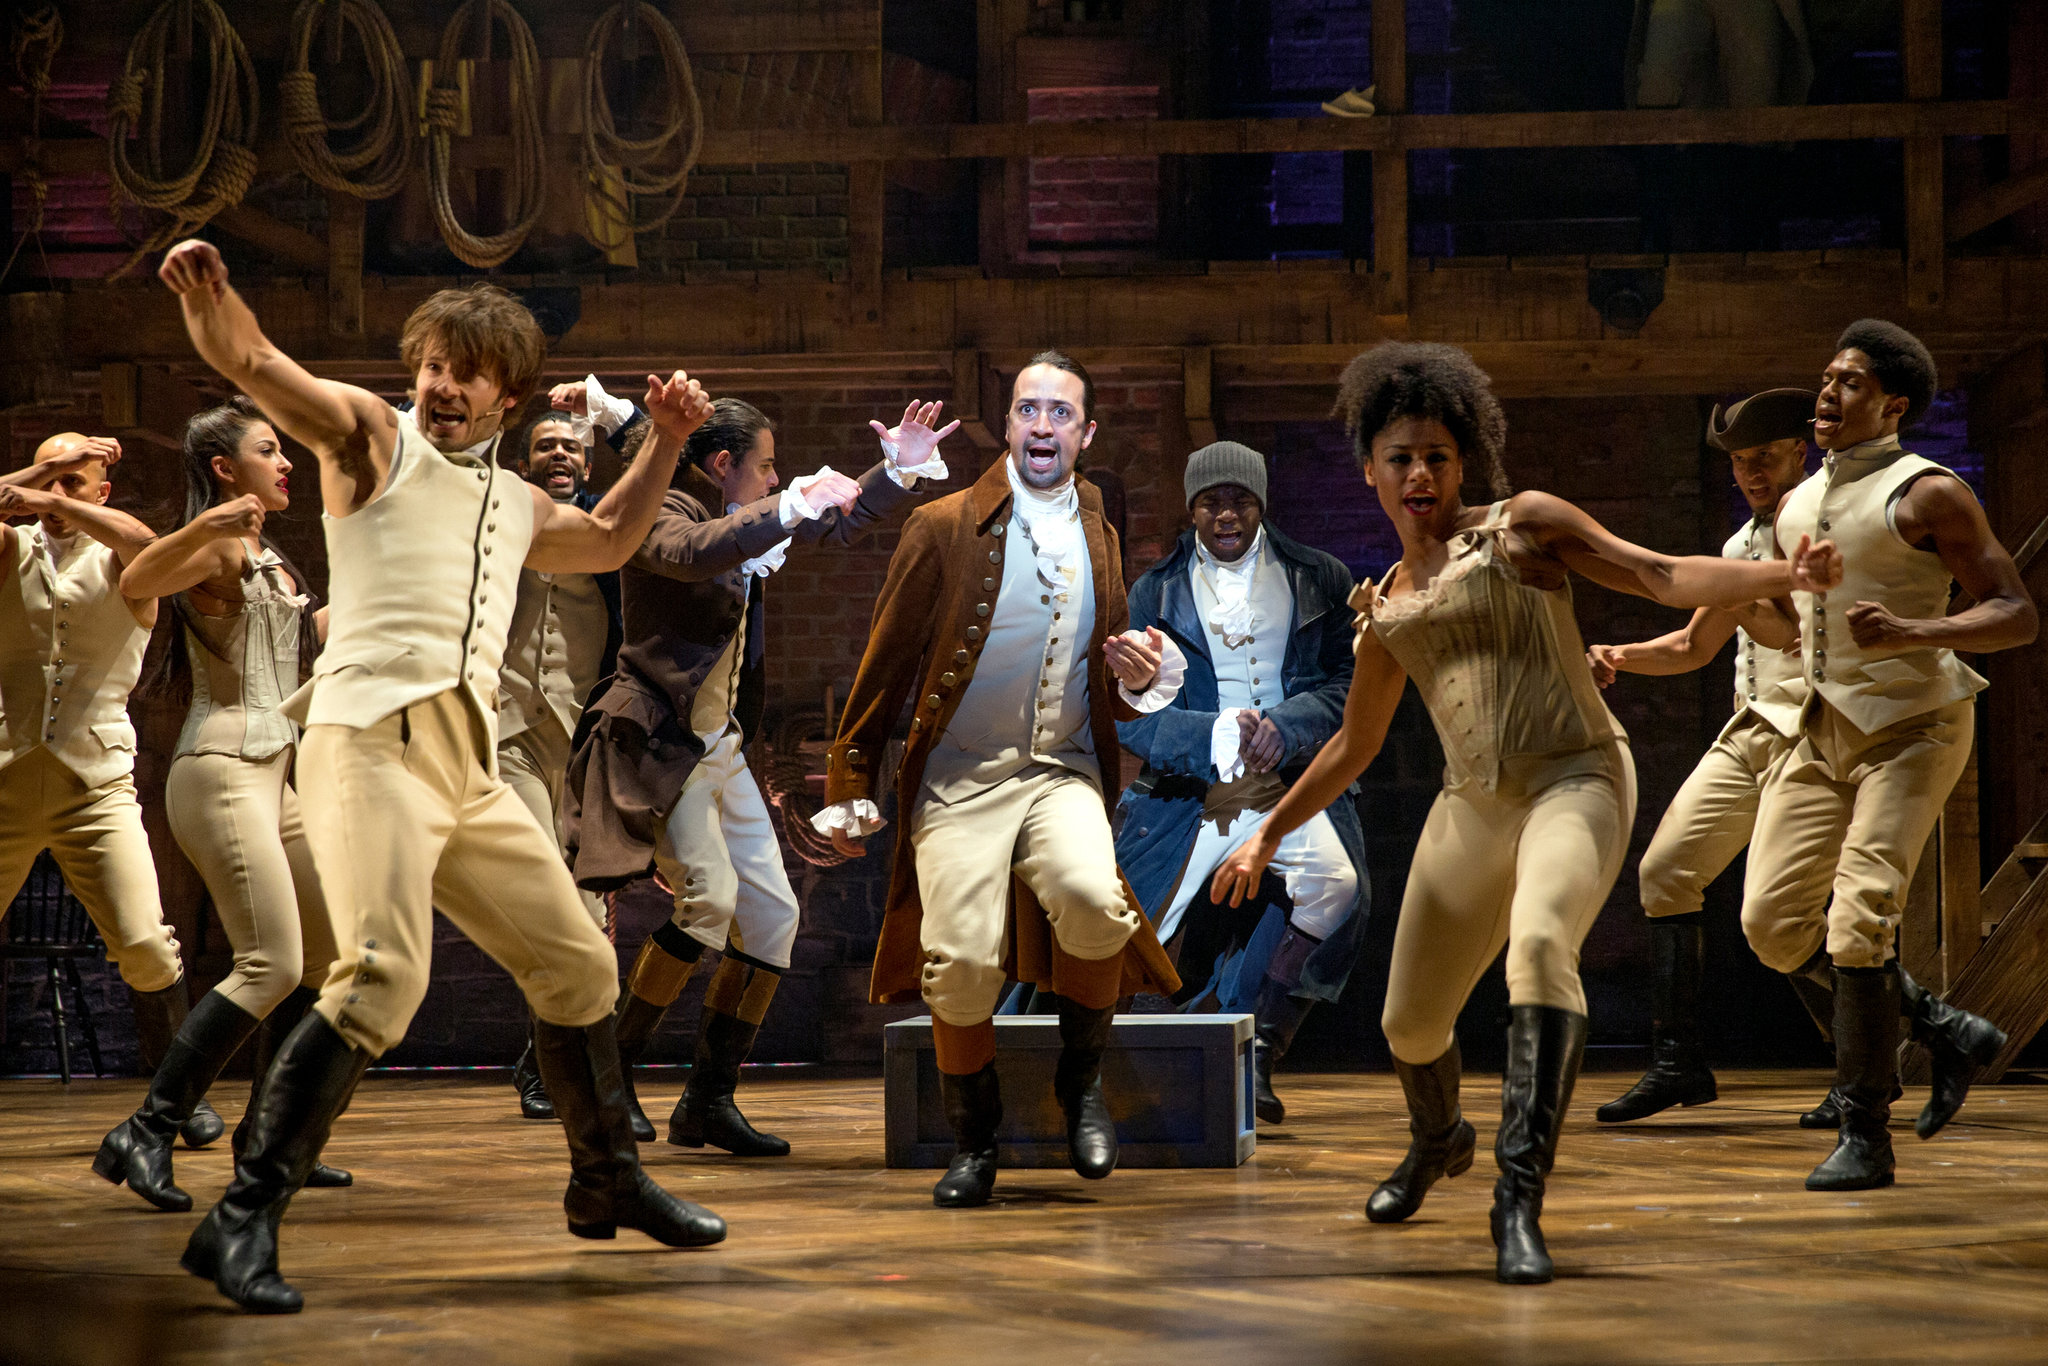 What’s Your Name, Man? Bringing “Hamilton” to the Masses